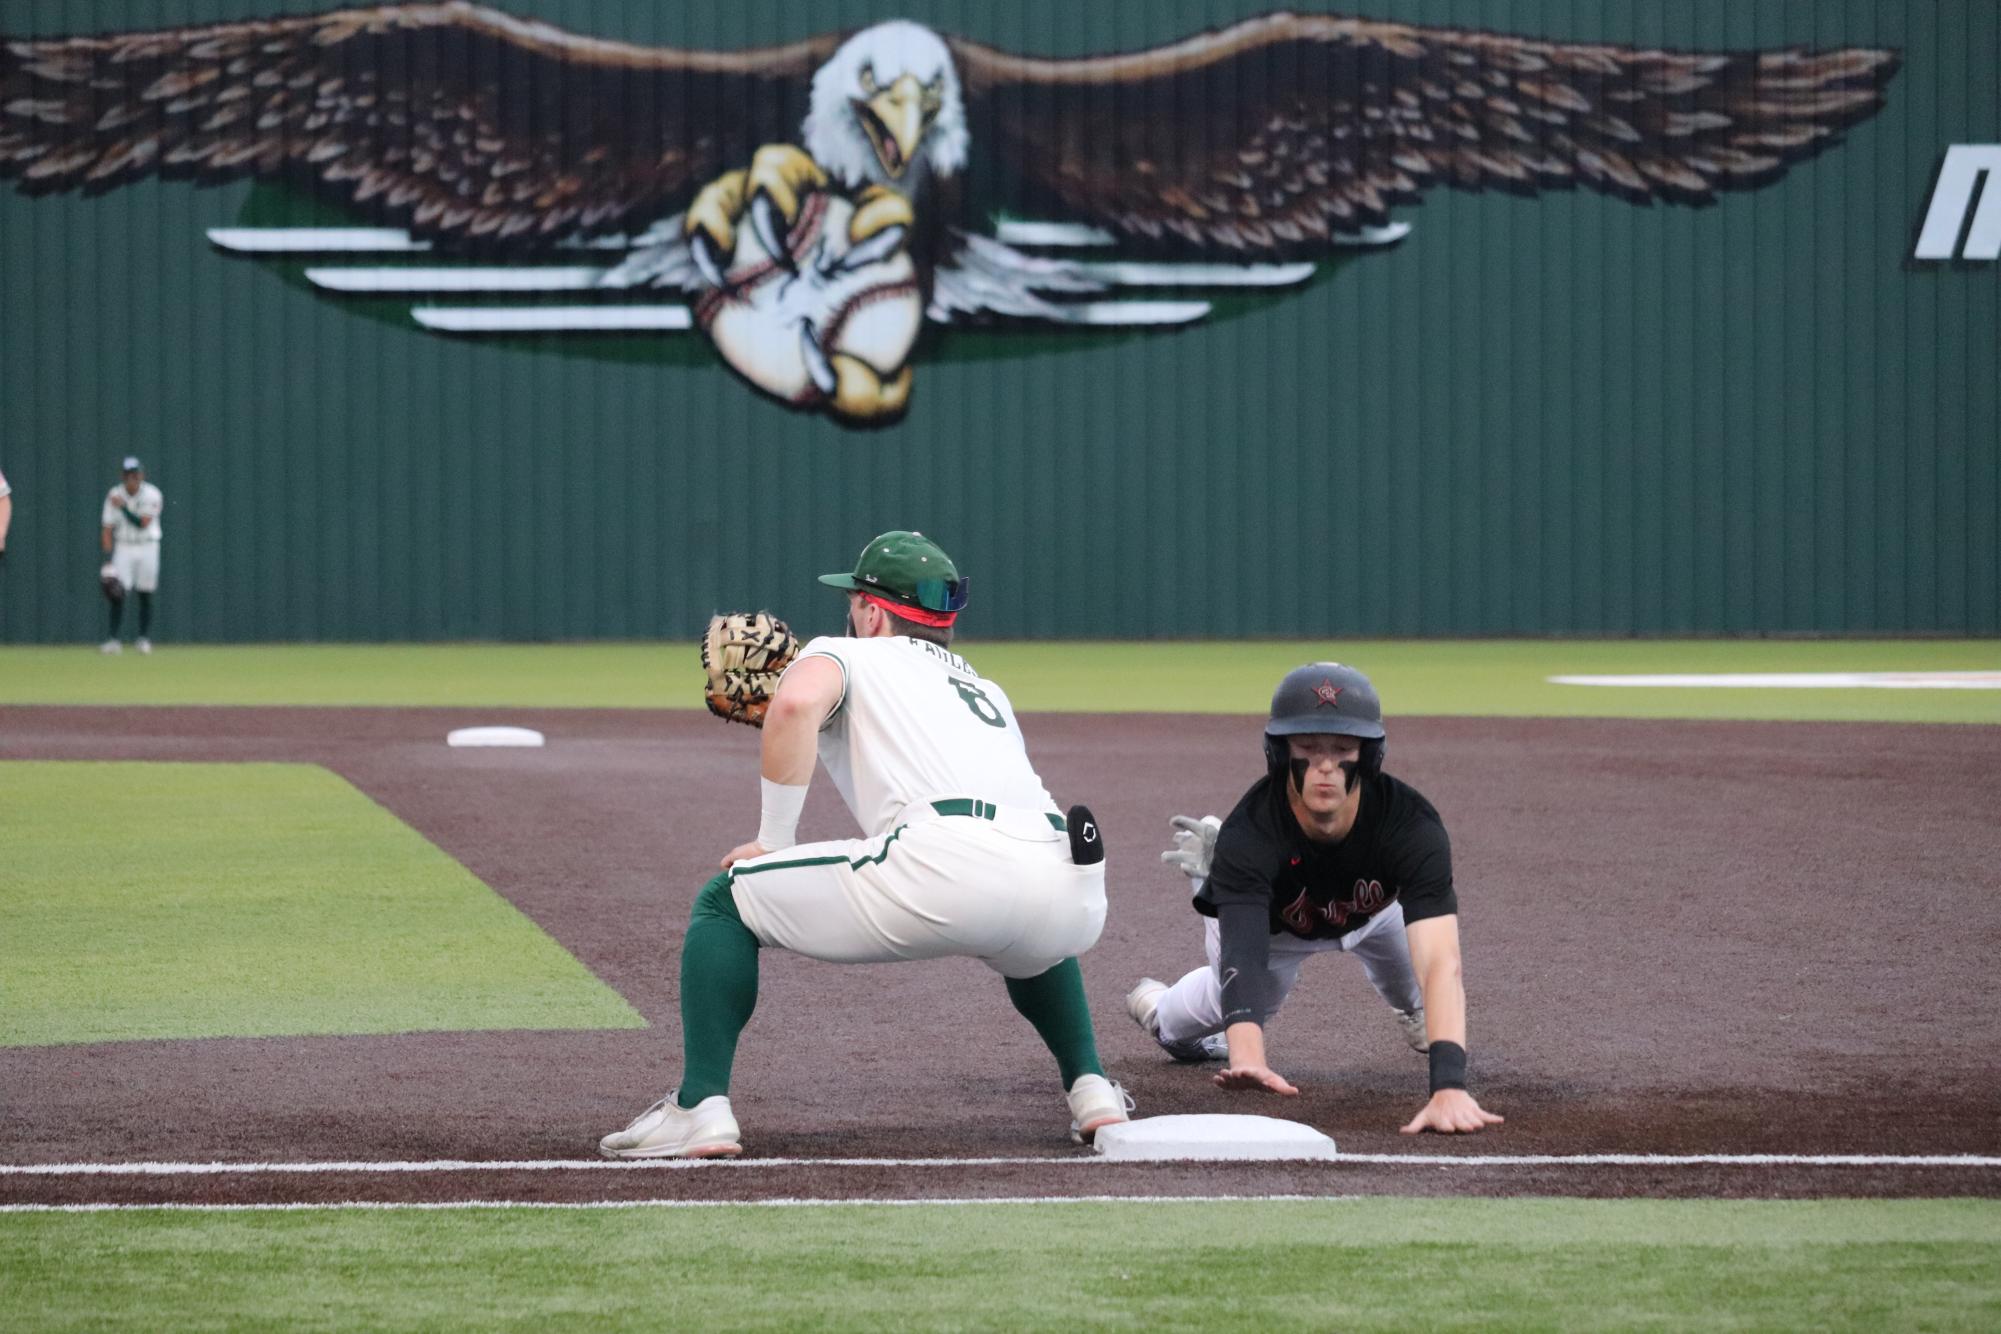 Eagles’ bats soar to series win to end Coppell’s baseball season